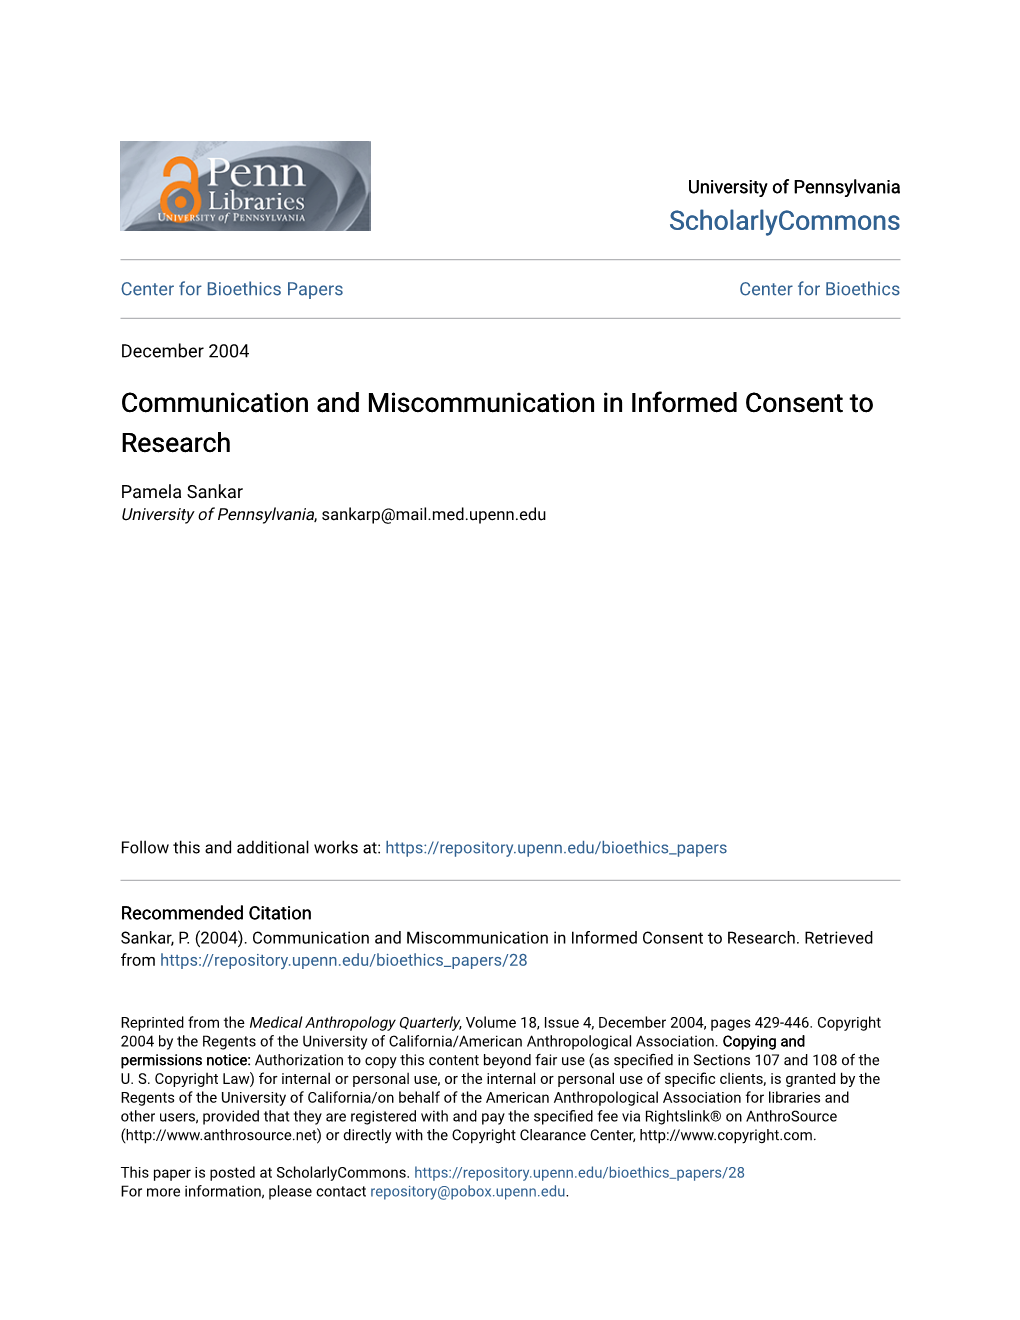 Communication and Miscommunication in Informed Consent to Research